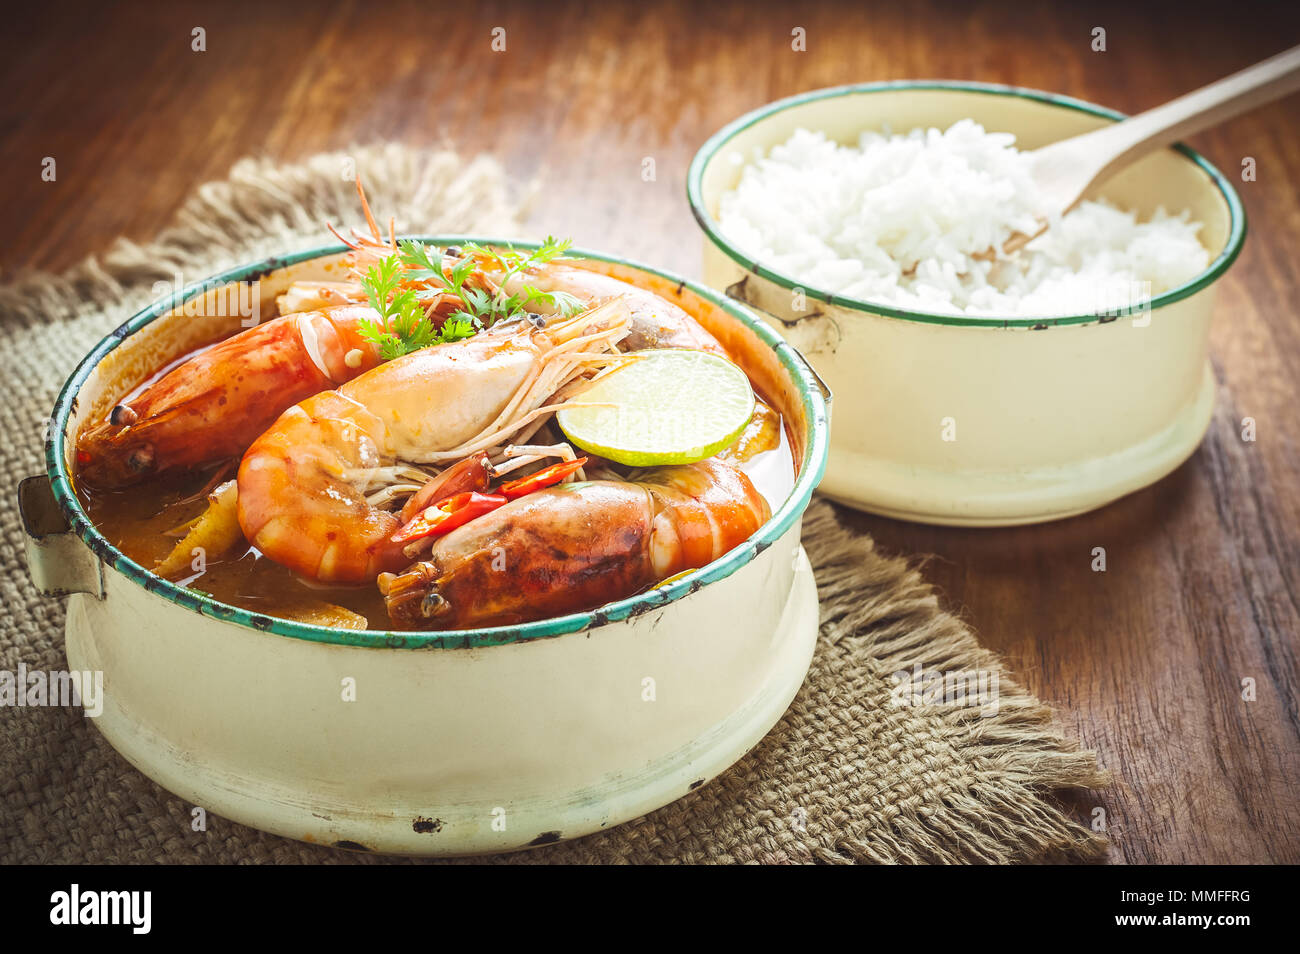 Thai food, River prawn spicy soup or tom yum goong on wooden table Stock Photo